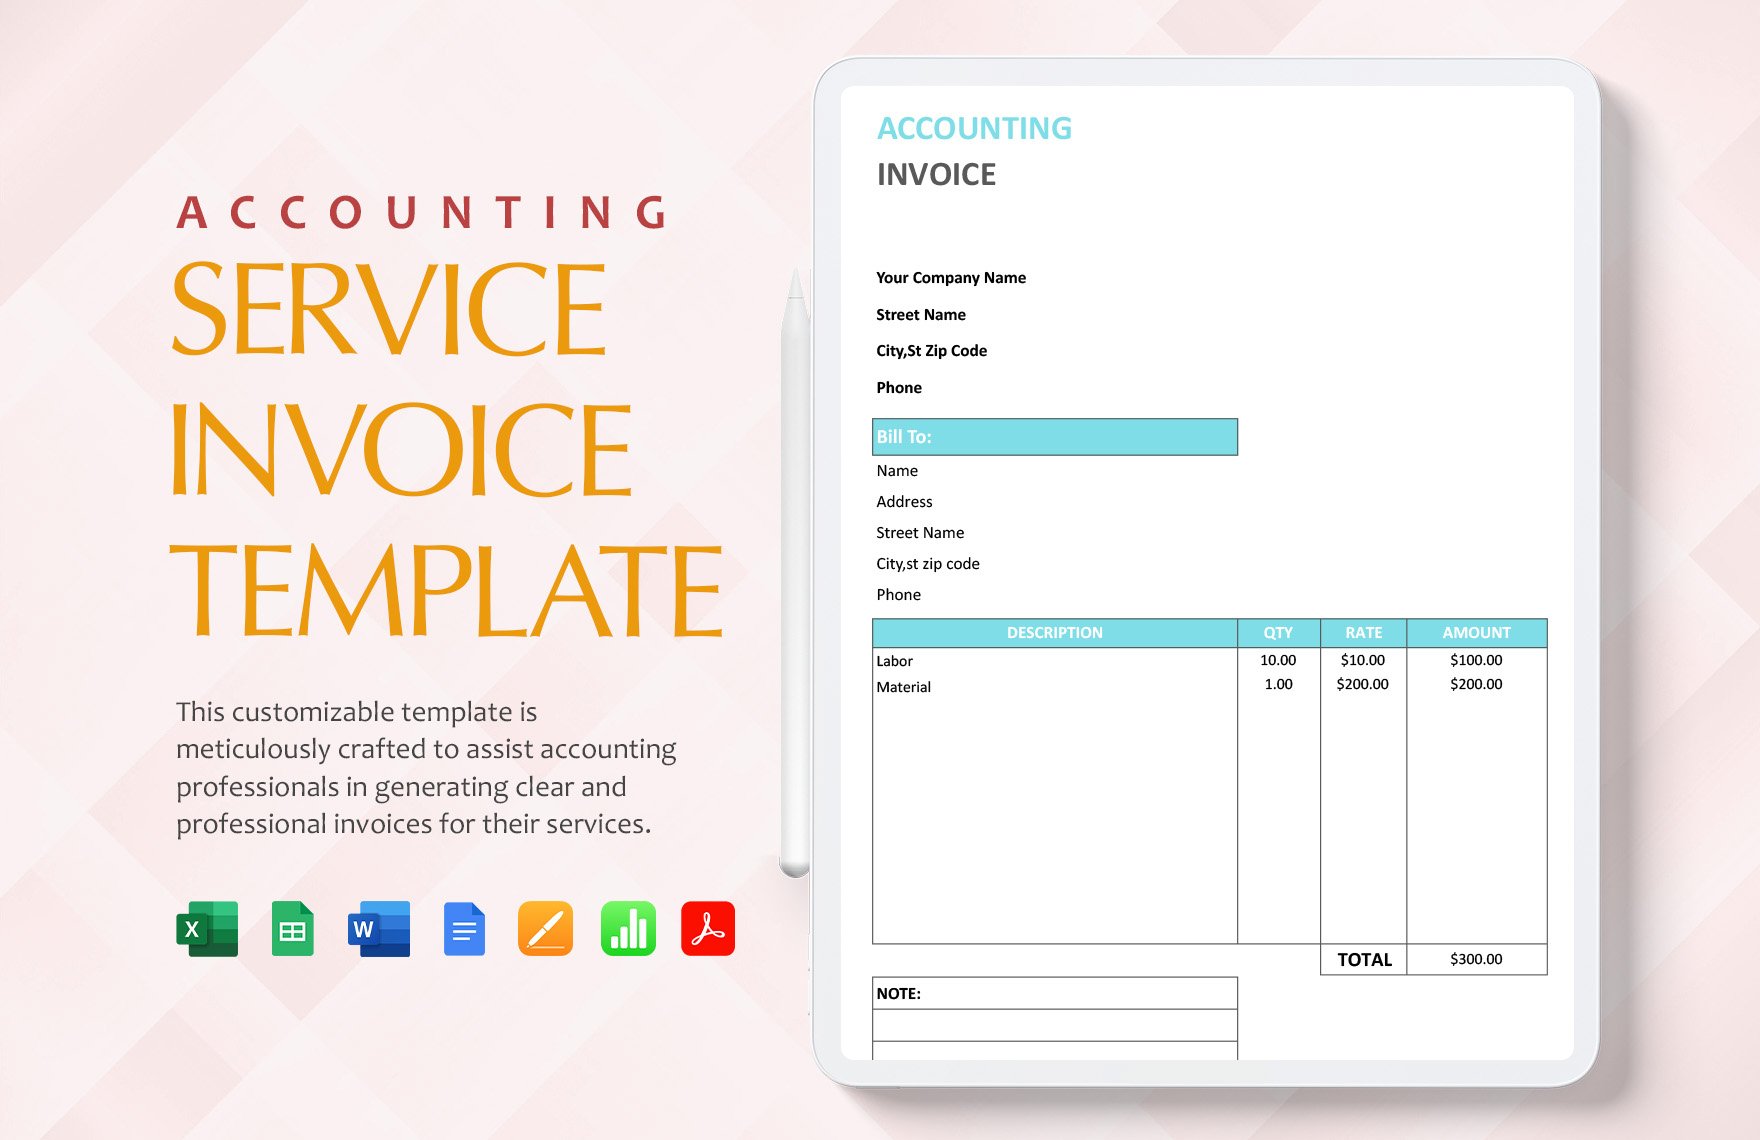 Accounting Service Invoice Template in Word, Google Docs, Excel, PDF, Google Sheets, Apple Pages, Apple Numbers